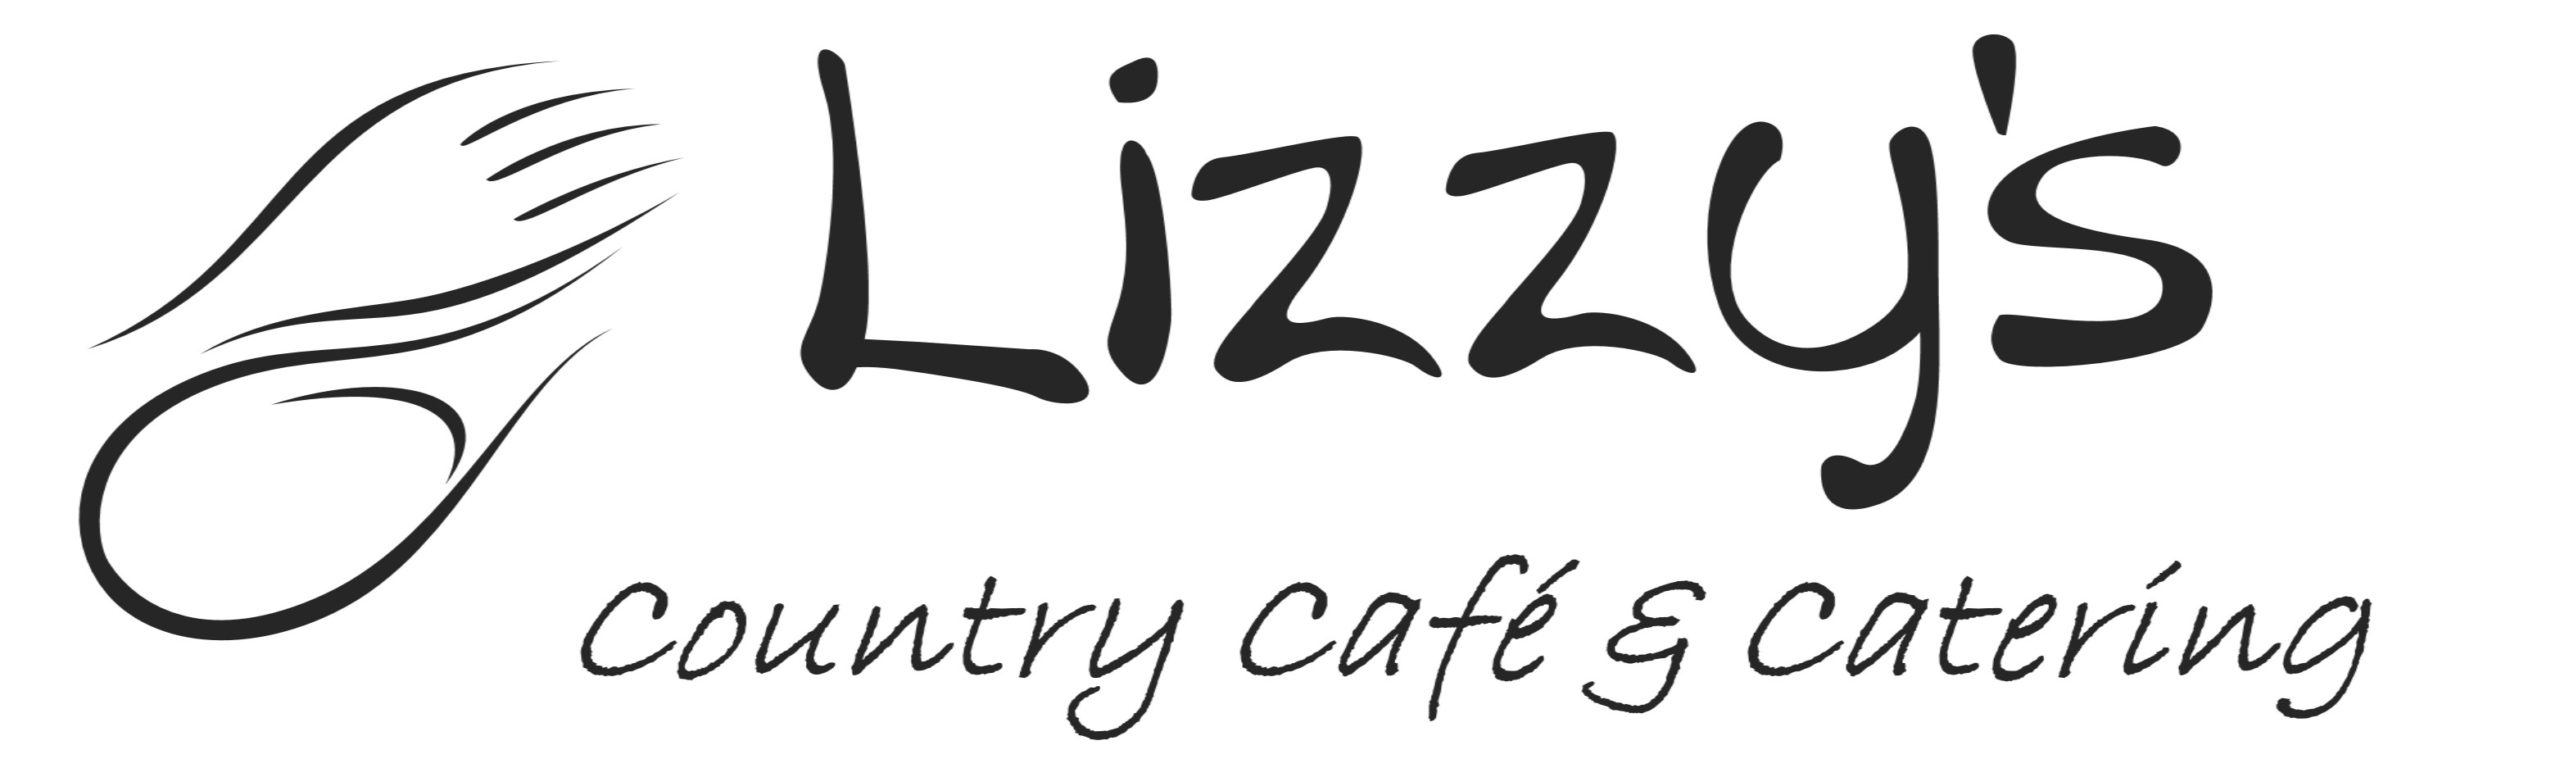 Lizzy's Country Cafe & Catering